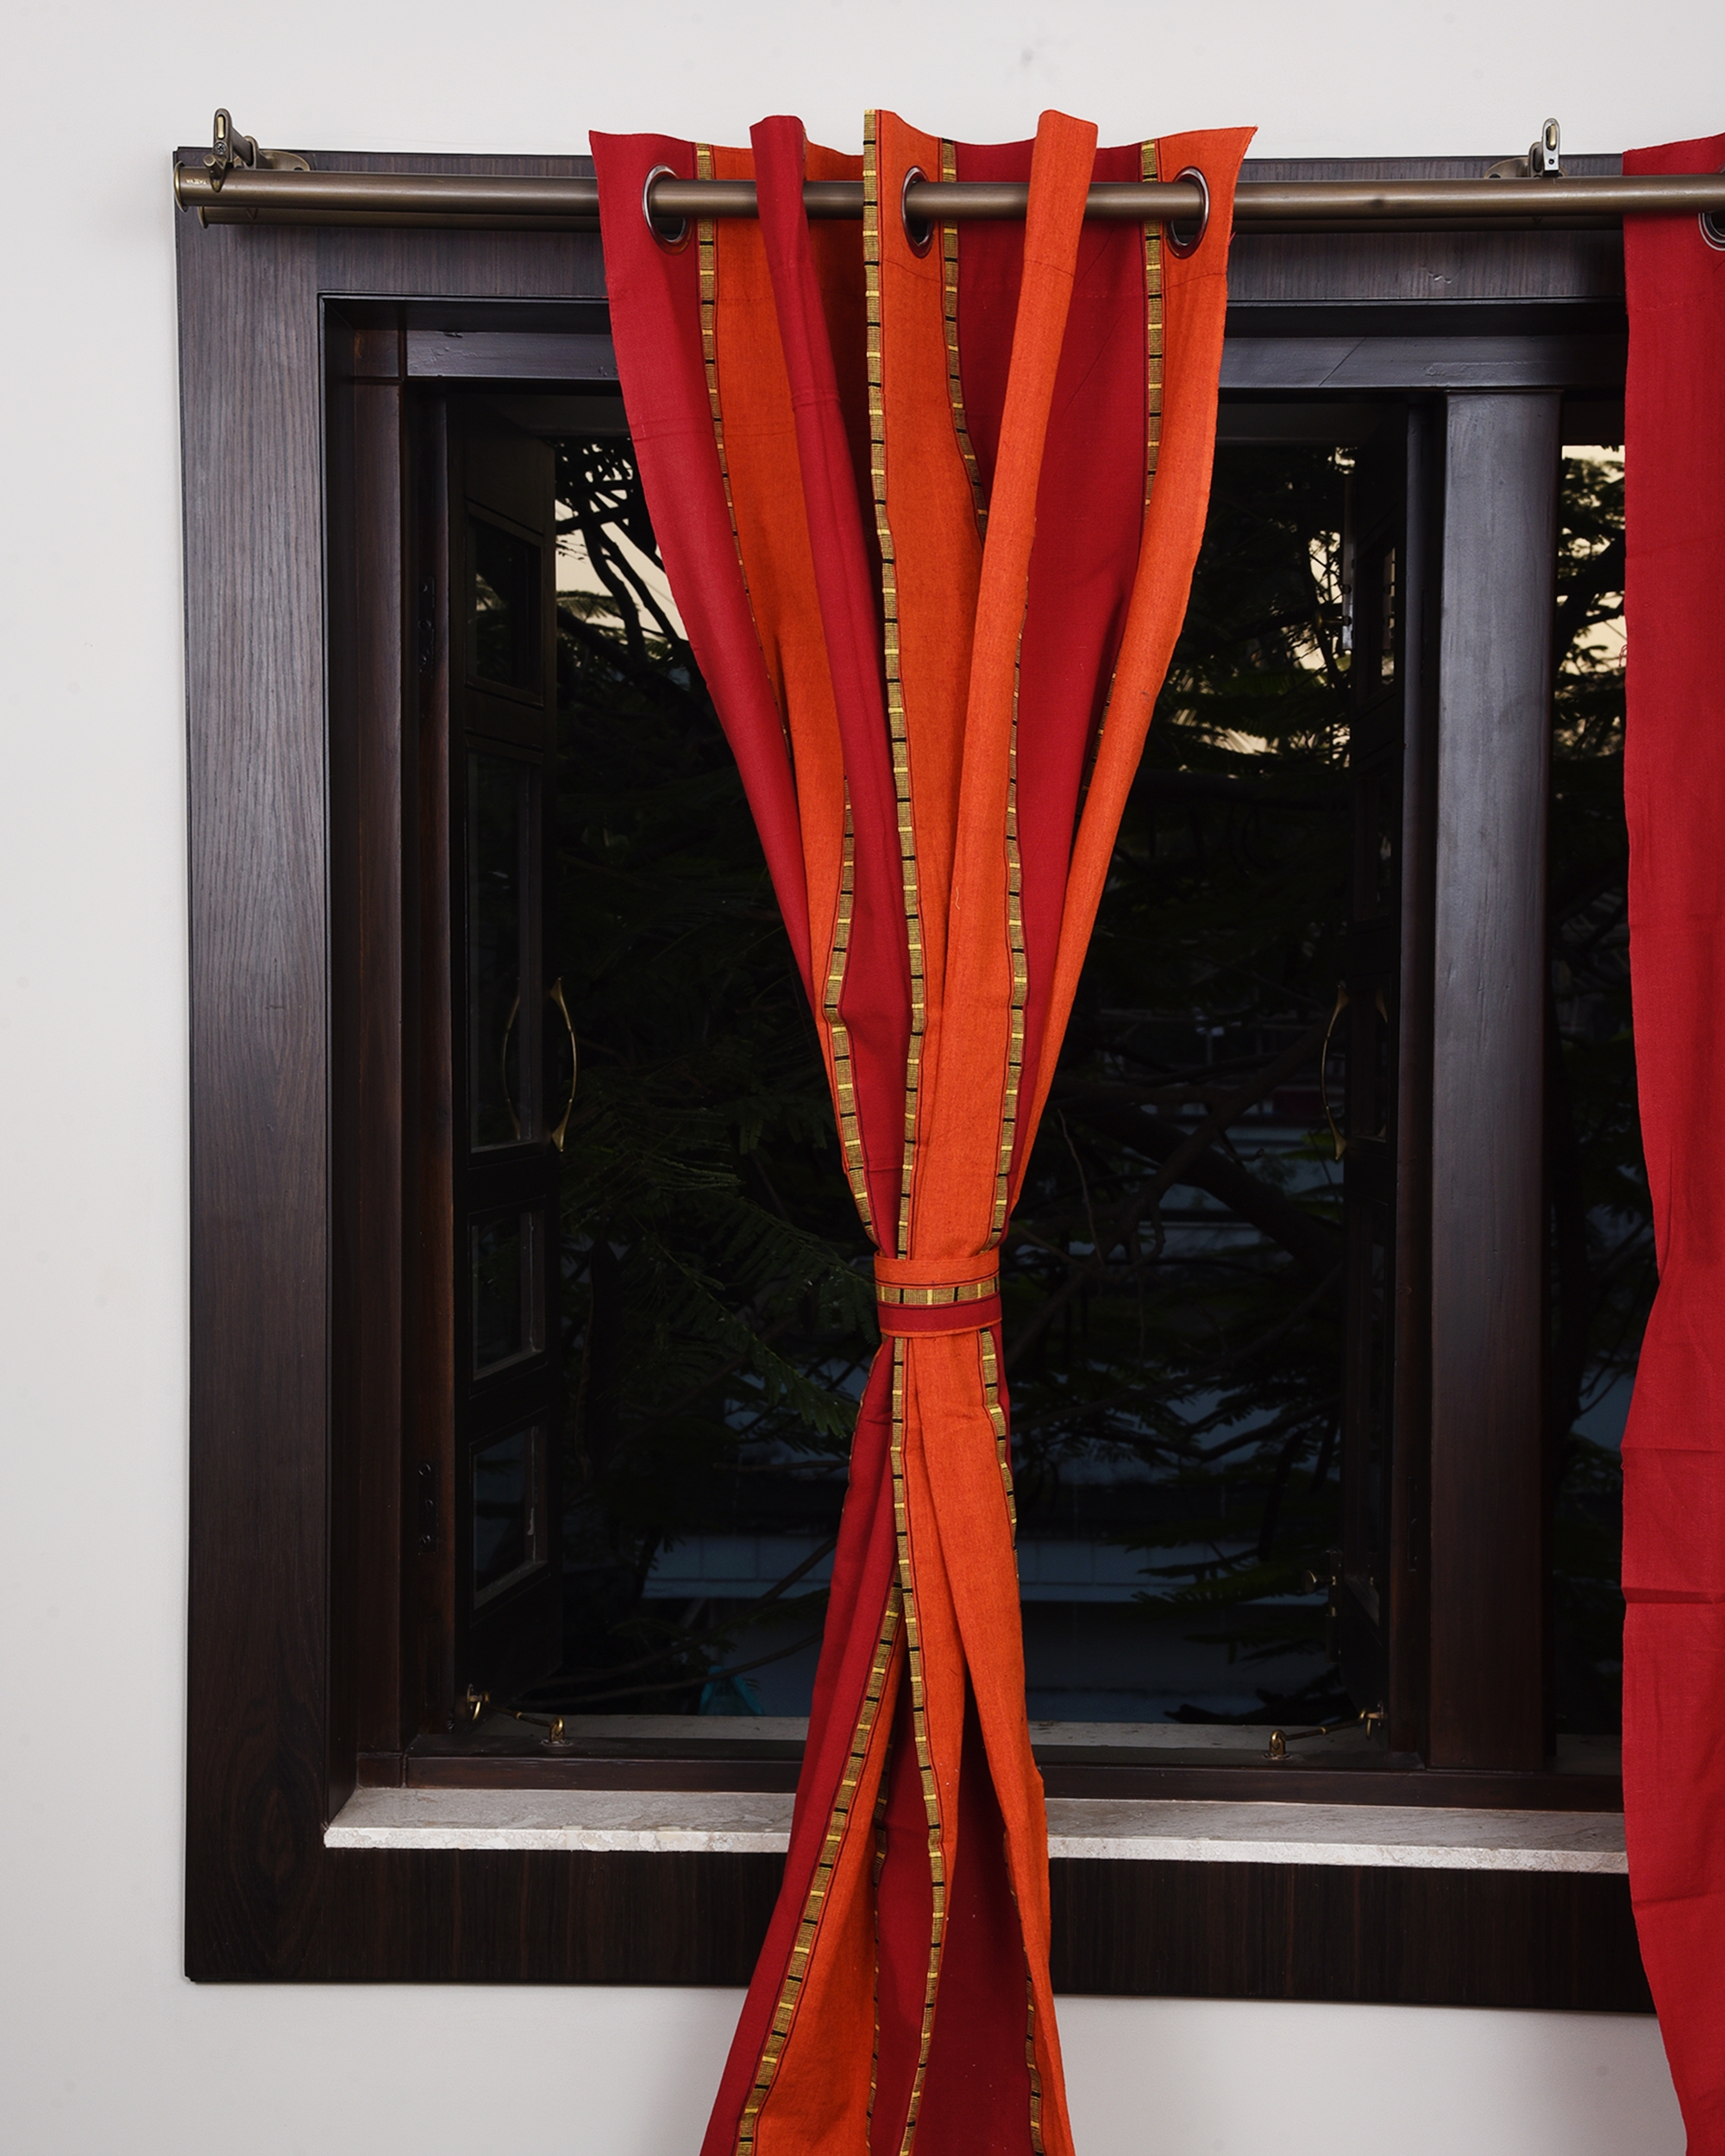 Boria Bistar | Handloom Cotton Curtains for Door with button and loop|1